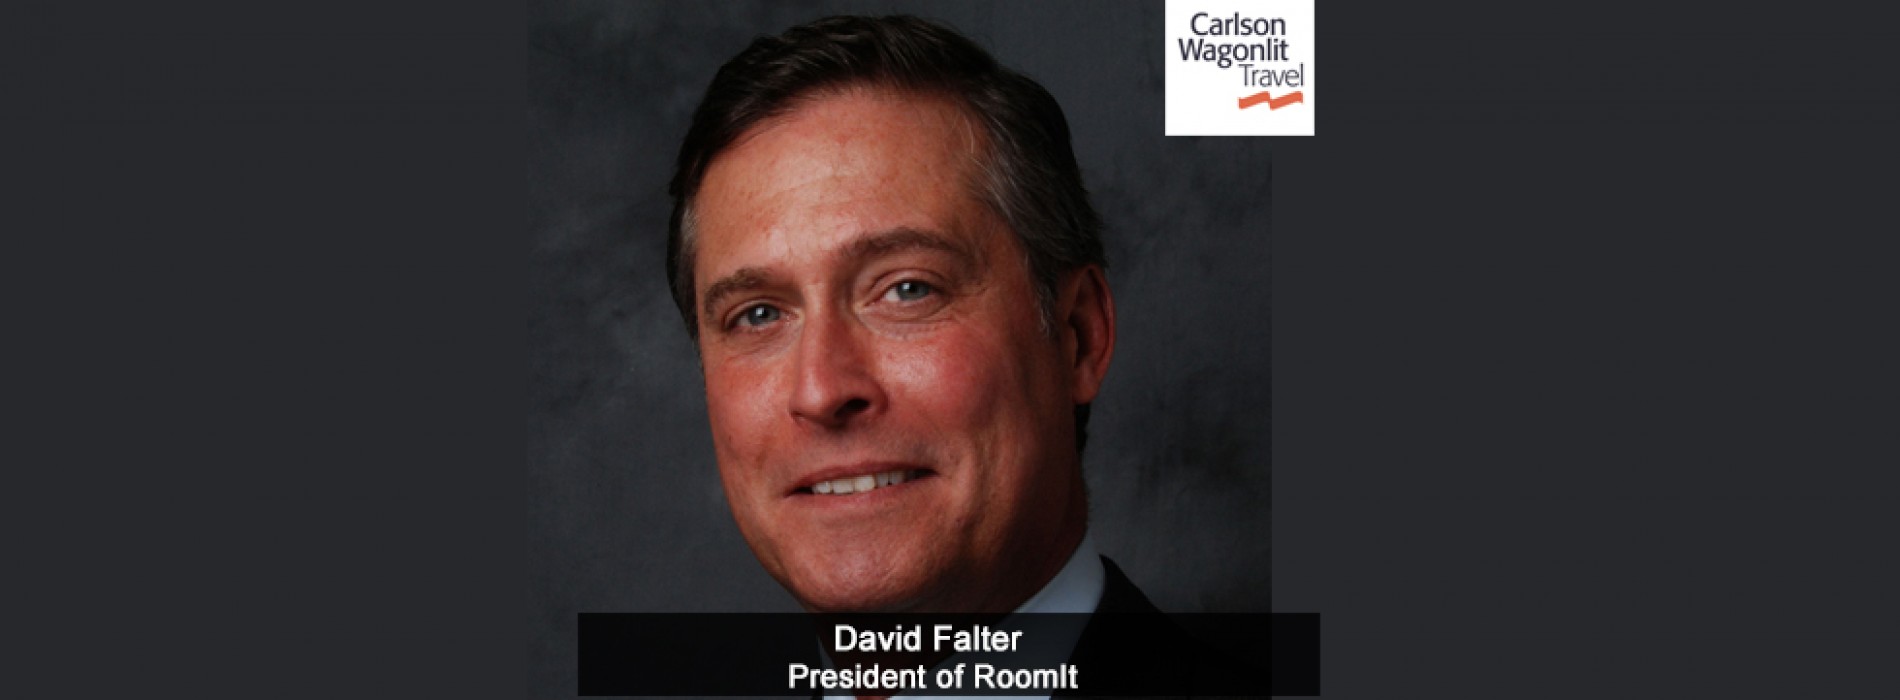 Carlson Wagonlit Travel appoints David Falter as President of RoomIt